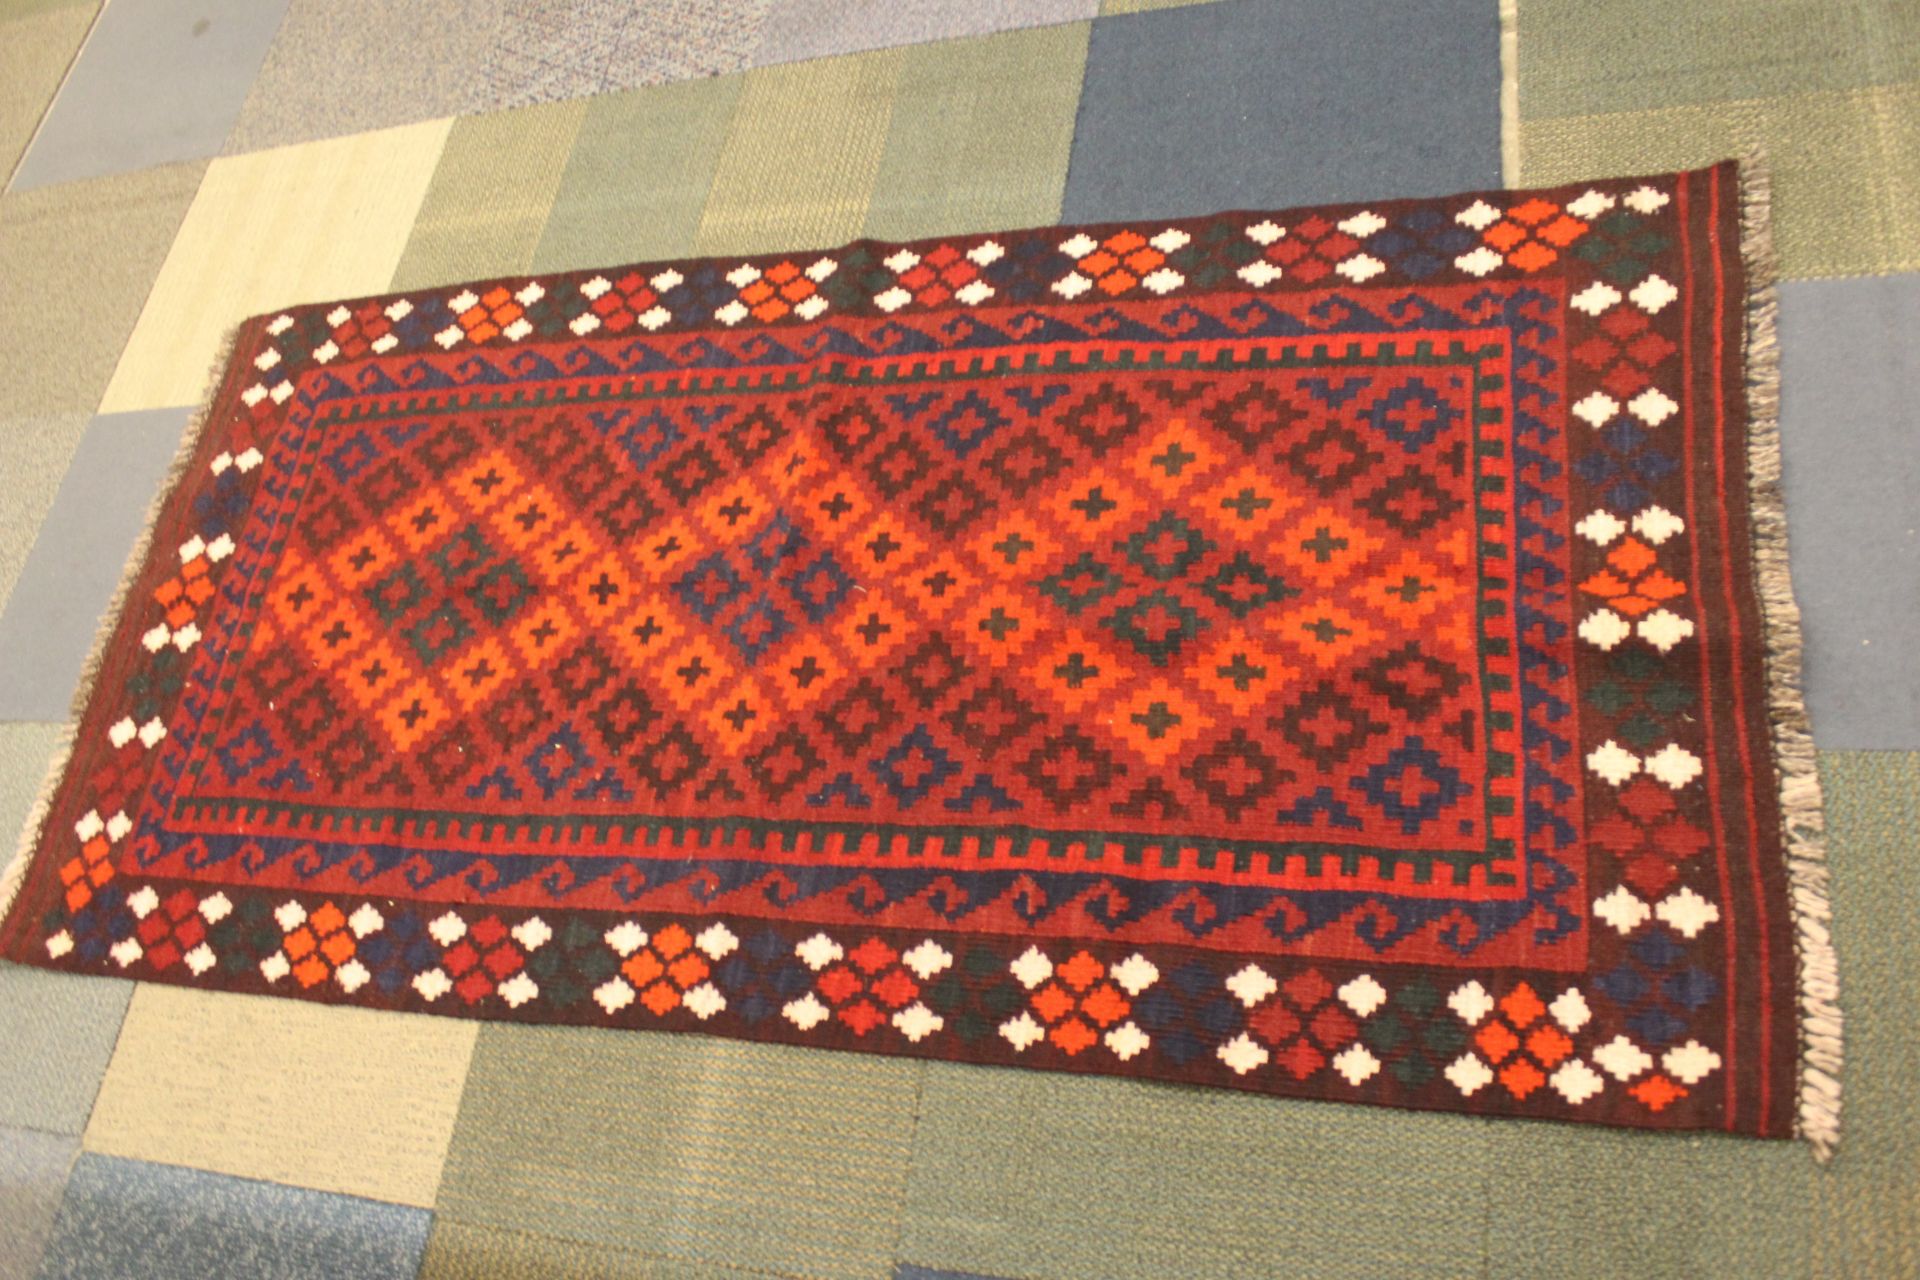 Brand New Quality Large Afghan Maimana Hand Made Lamb Wool Kilim Rug Double Face Design 202 x